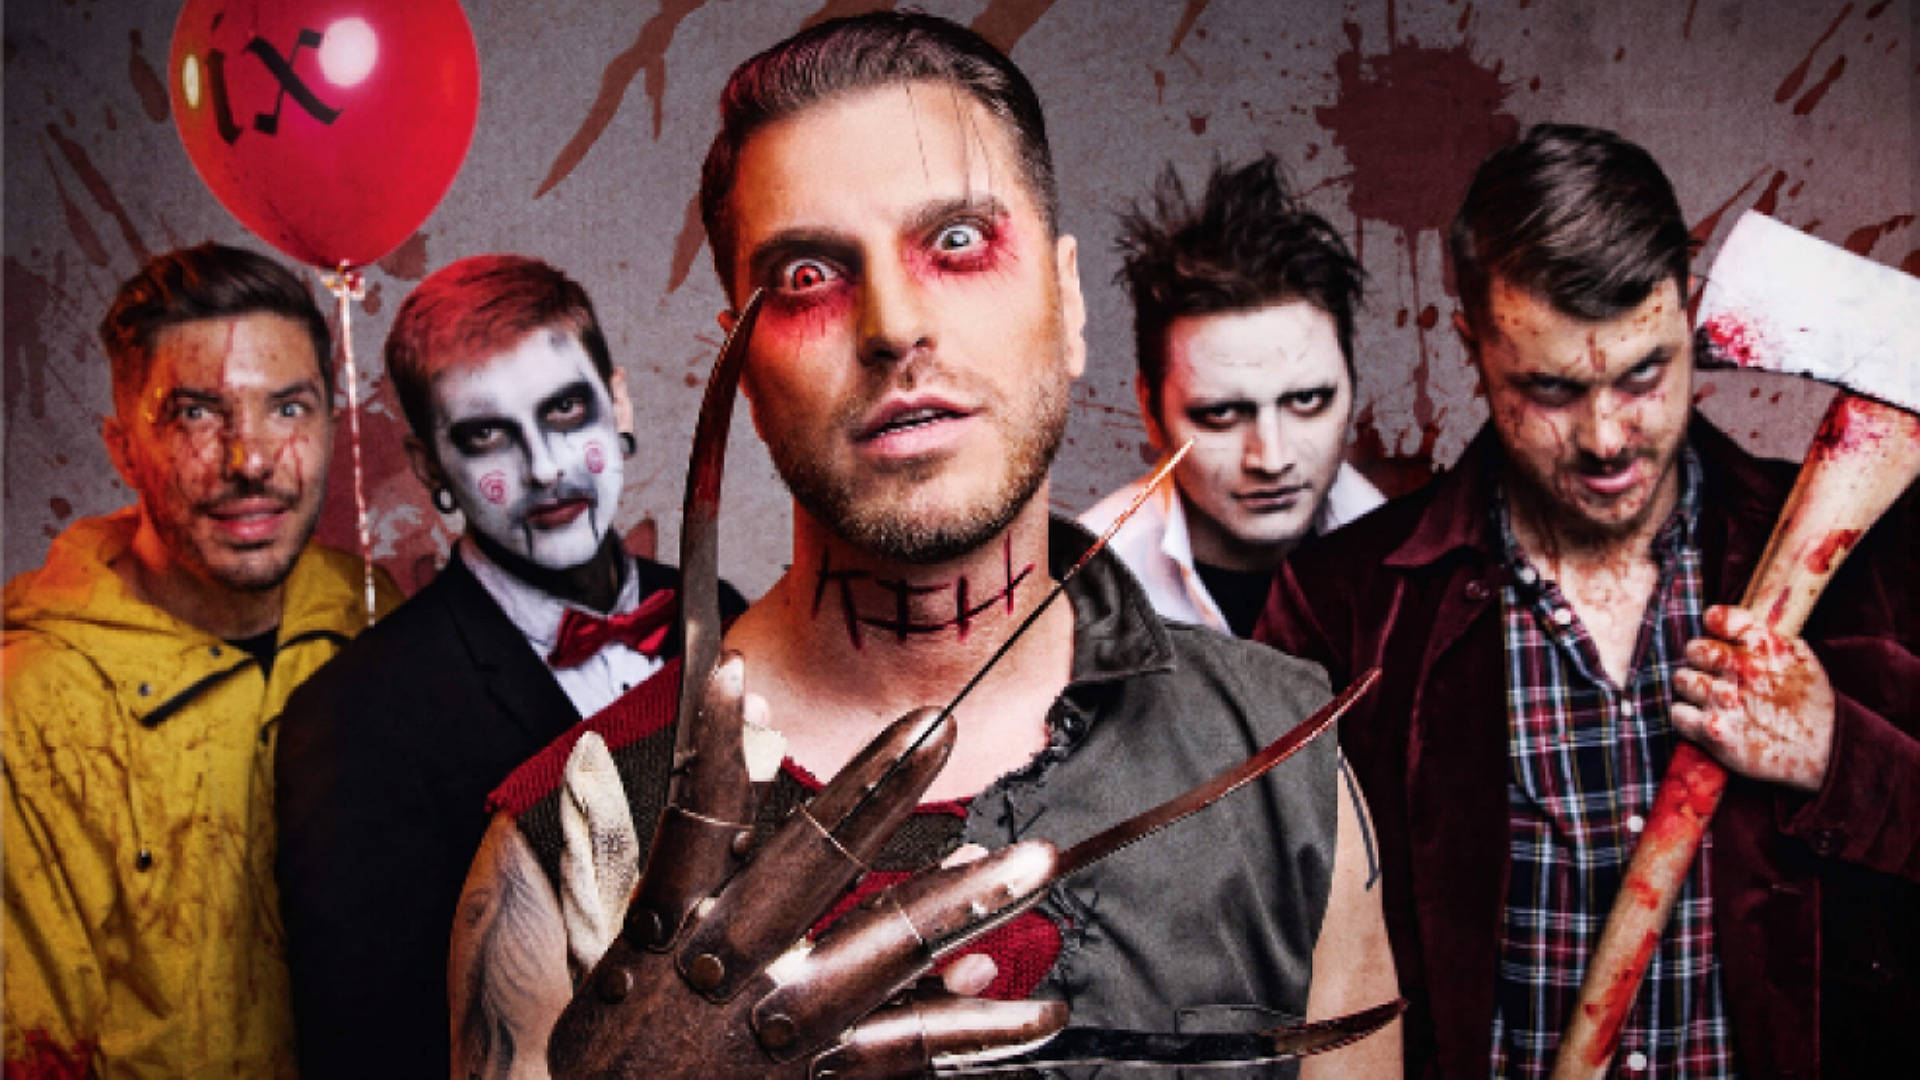 Ice Nine Kills Members Glammed Up With Creepy Faces Wallpaper